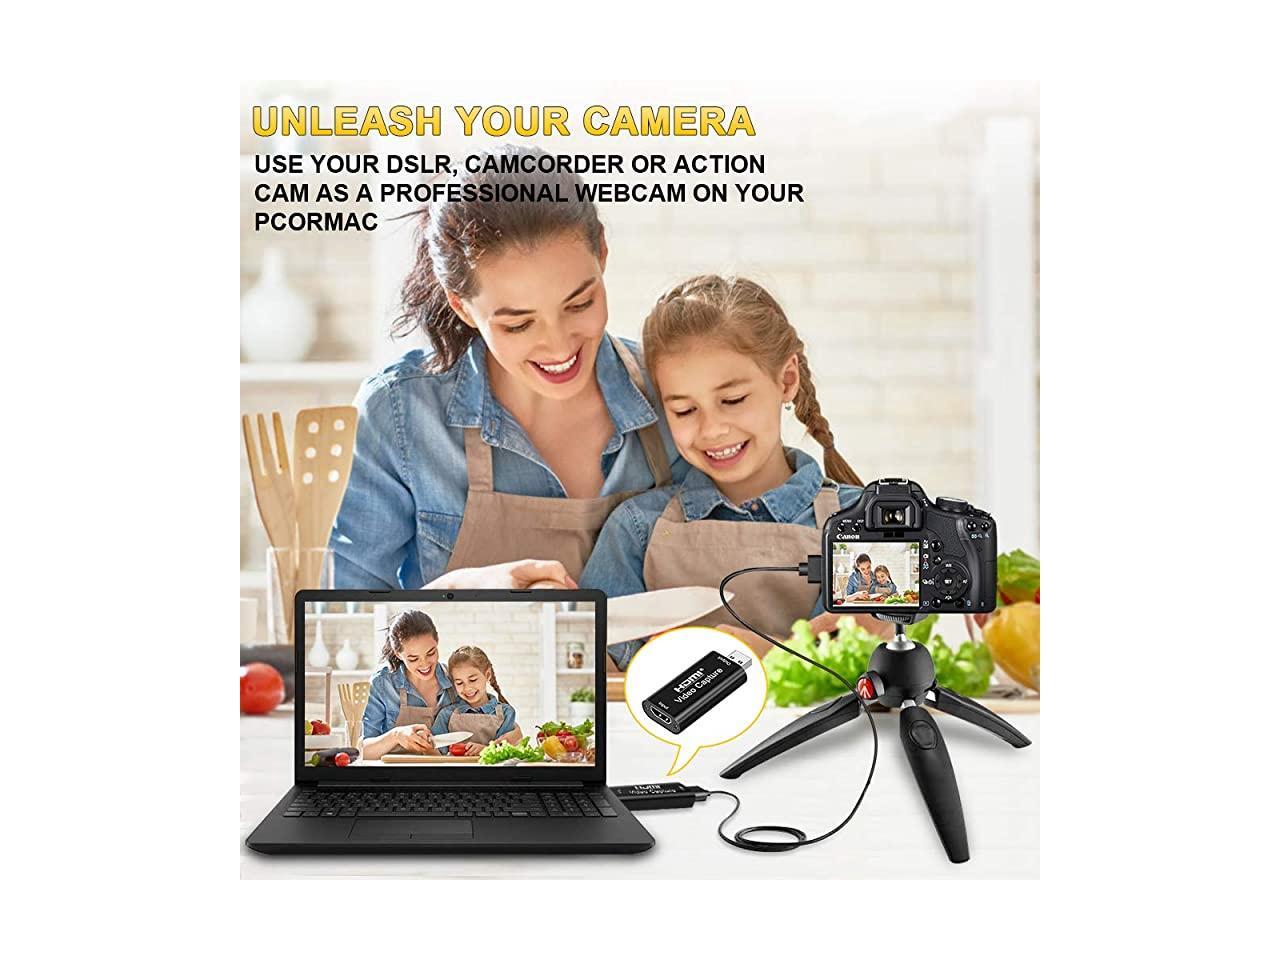 Capture Card 4k Hdmi To Usb 20 Video Capture Device 1080p